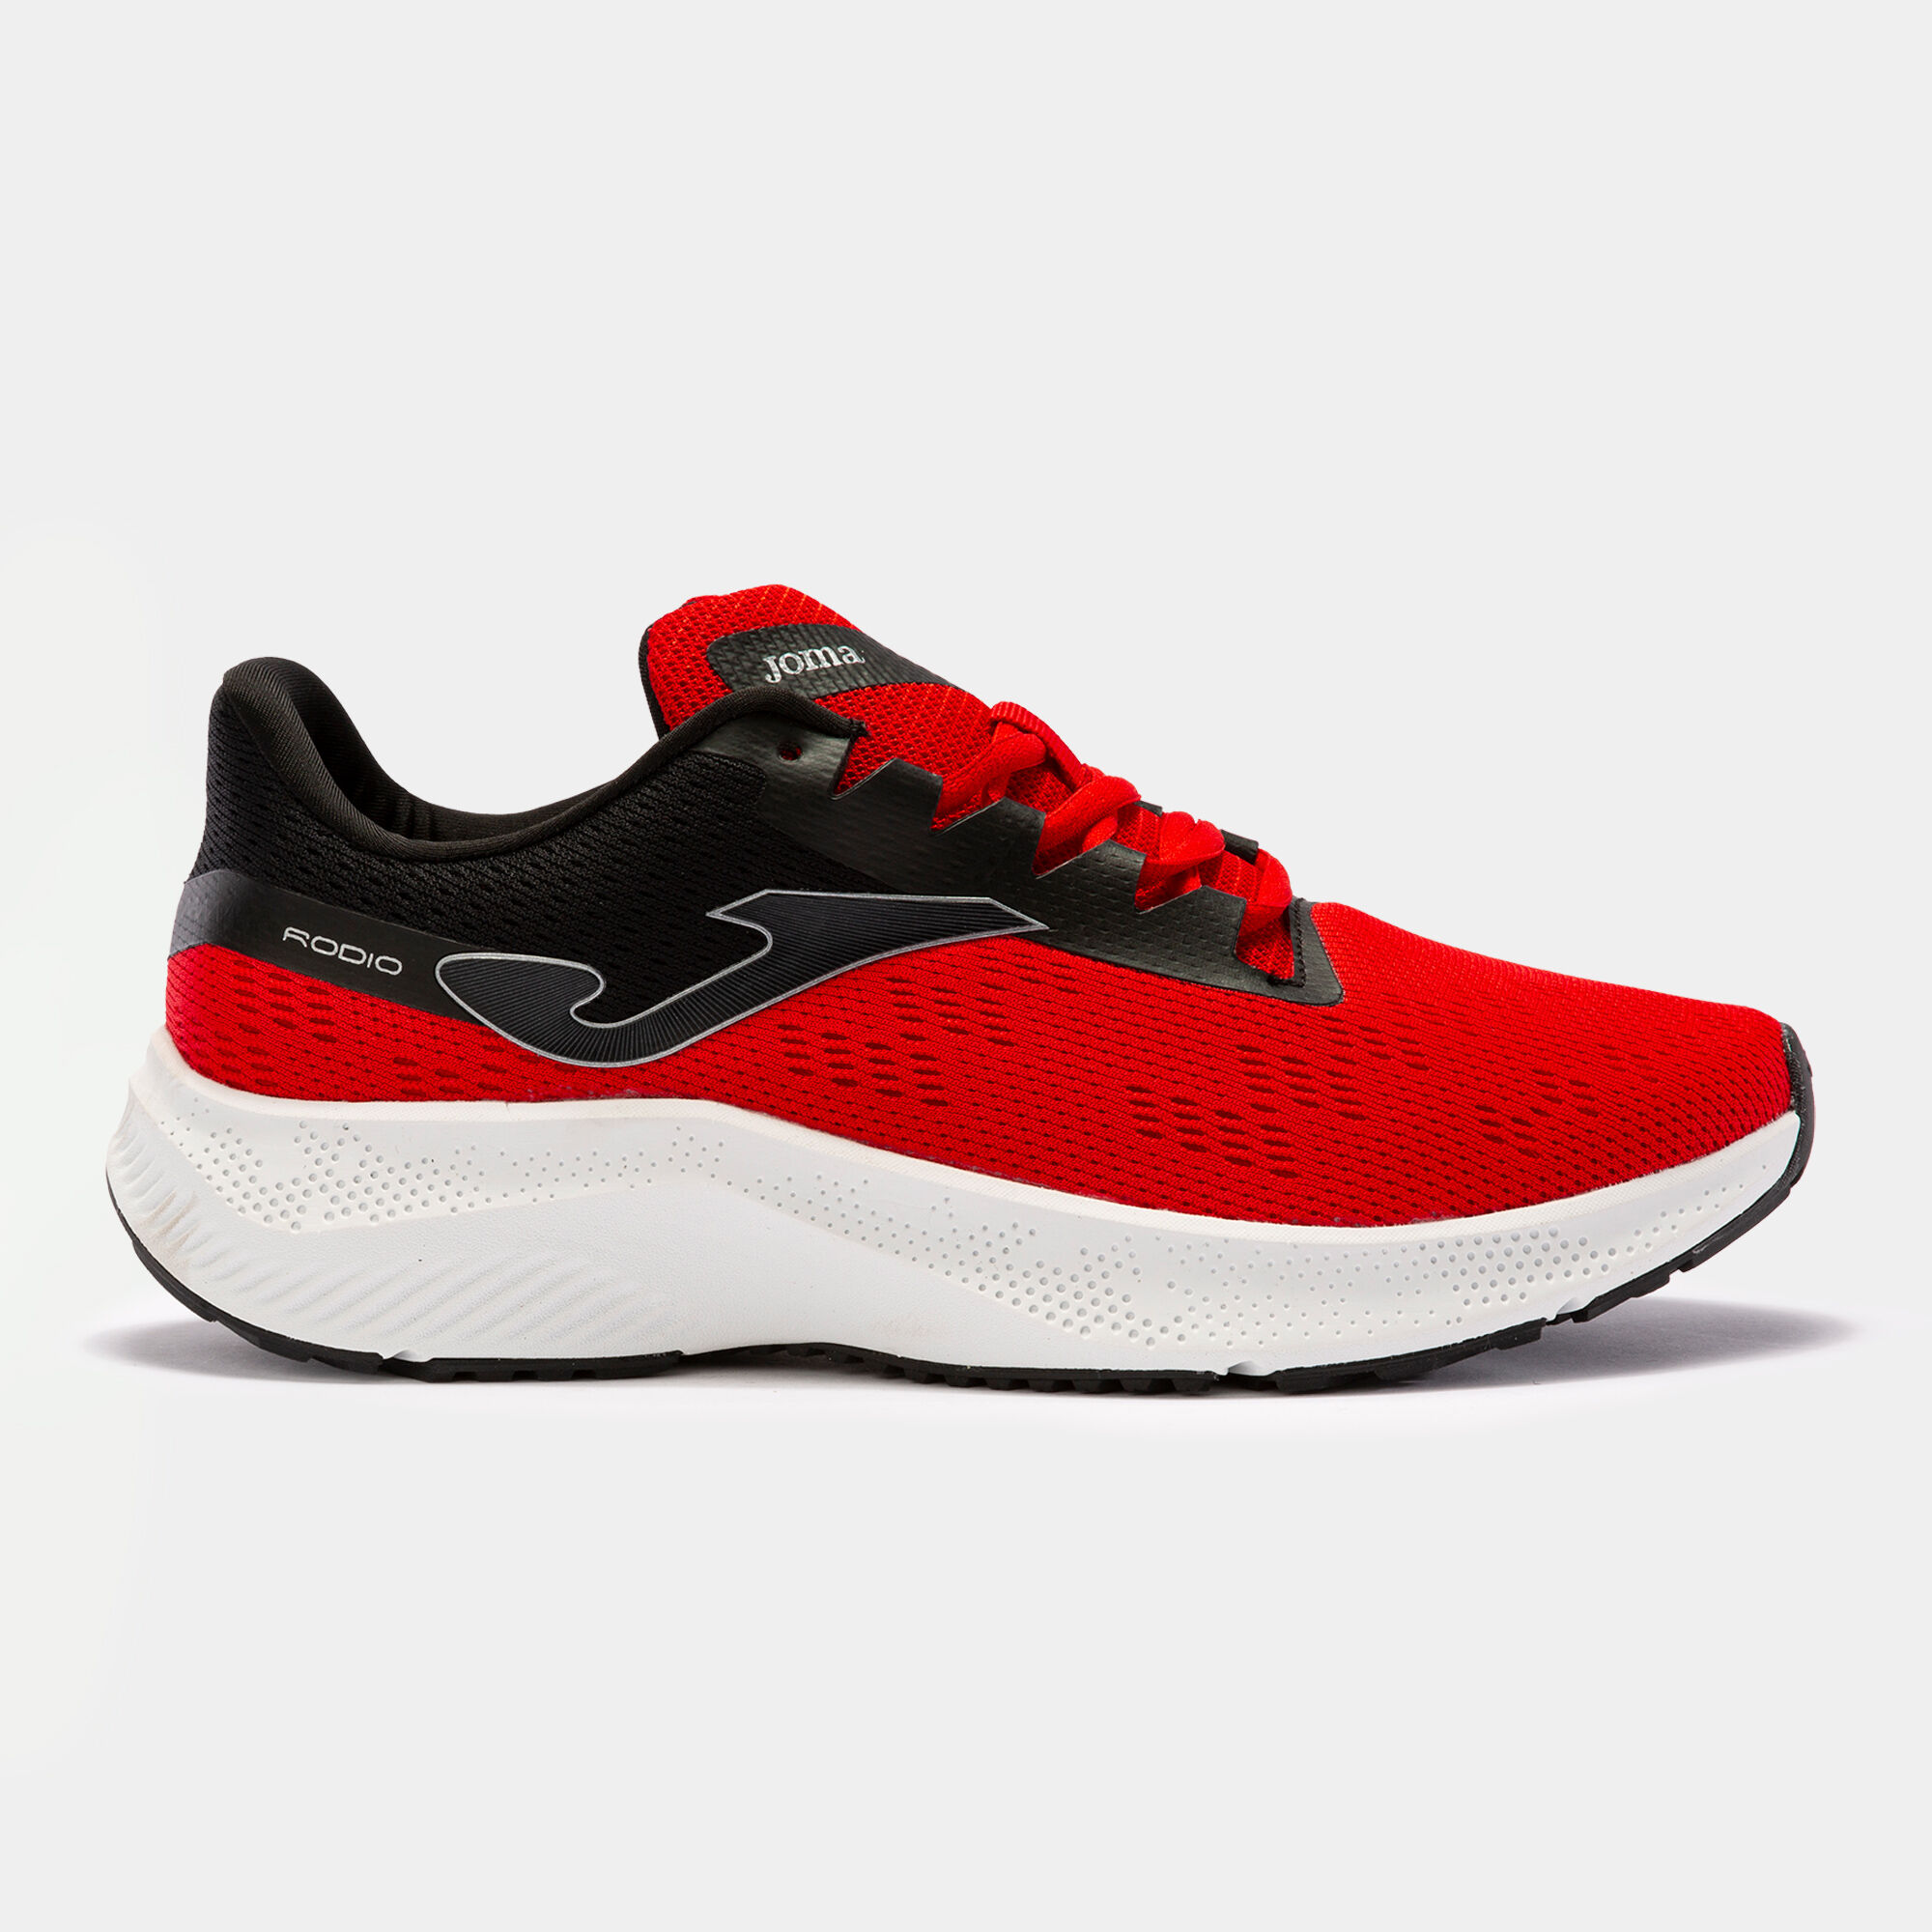 CHAUSSURES RUNNING RODIO 22 HOMME ROUGE